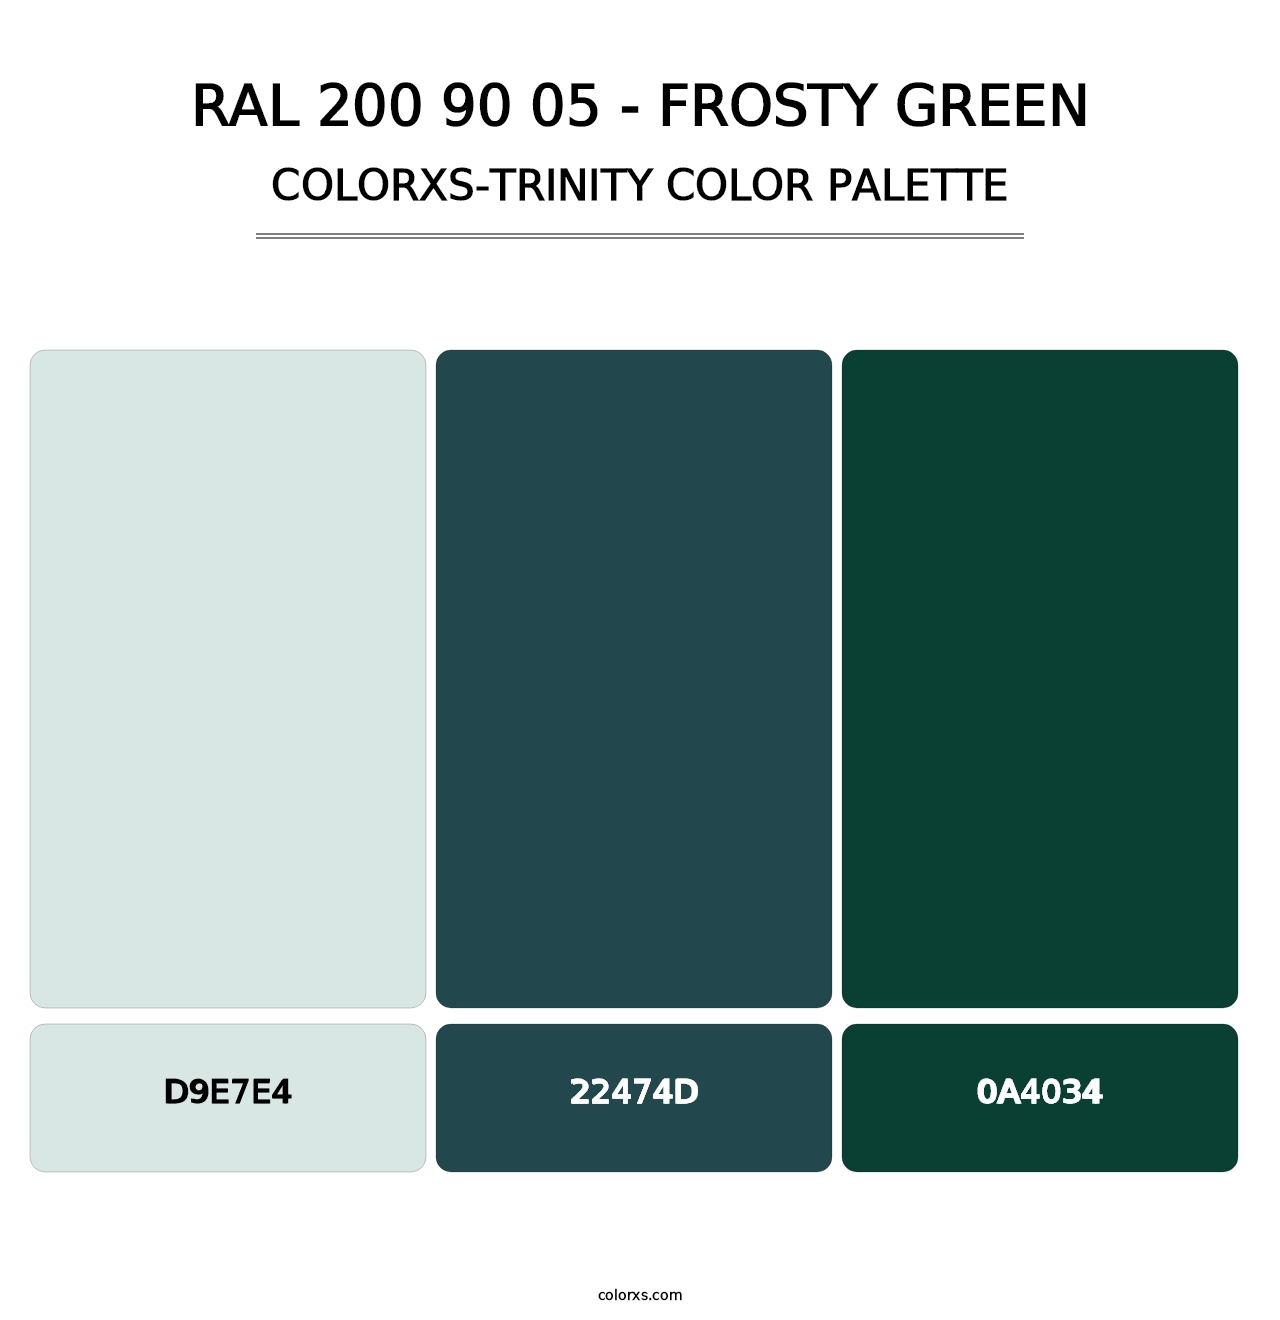 RAL 200 90 05 - Frosty Green - Colorxs Trinity Palette